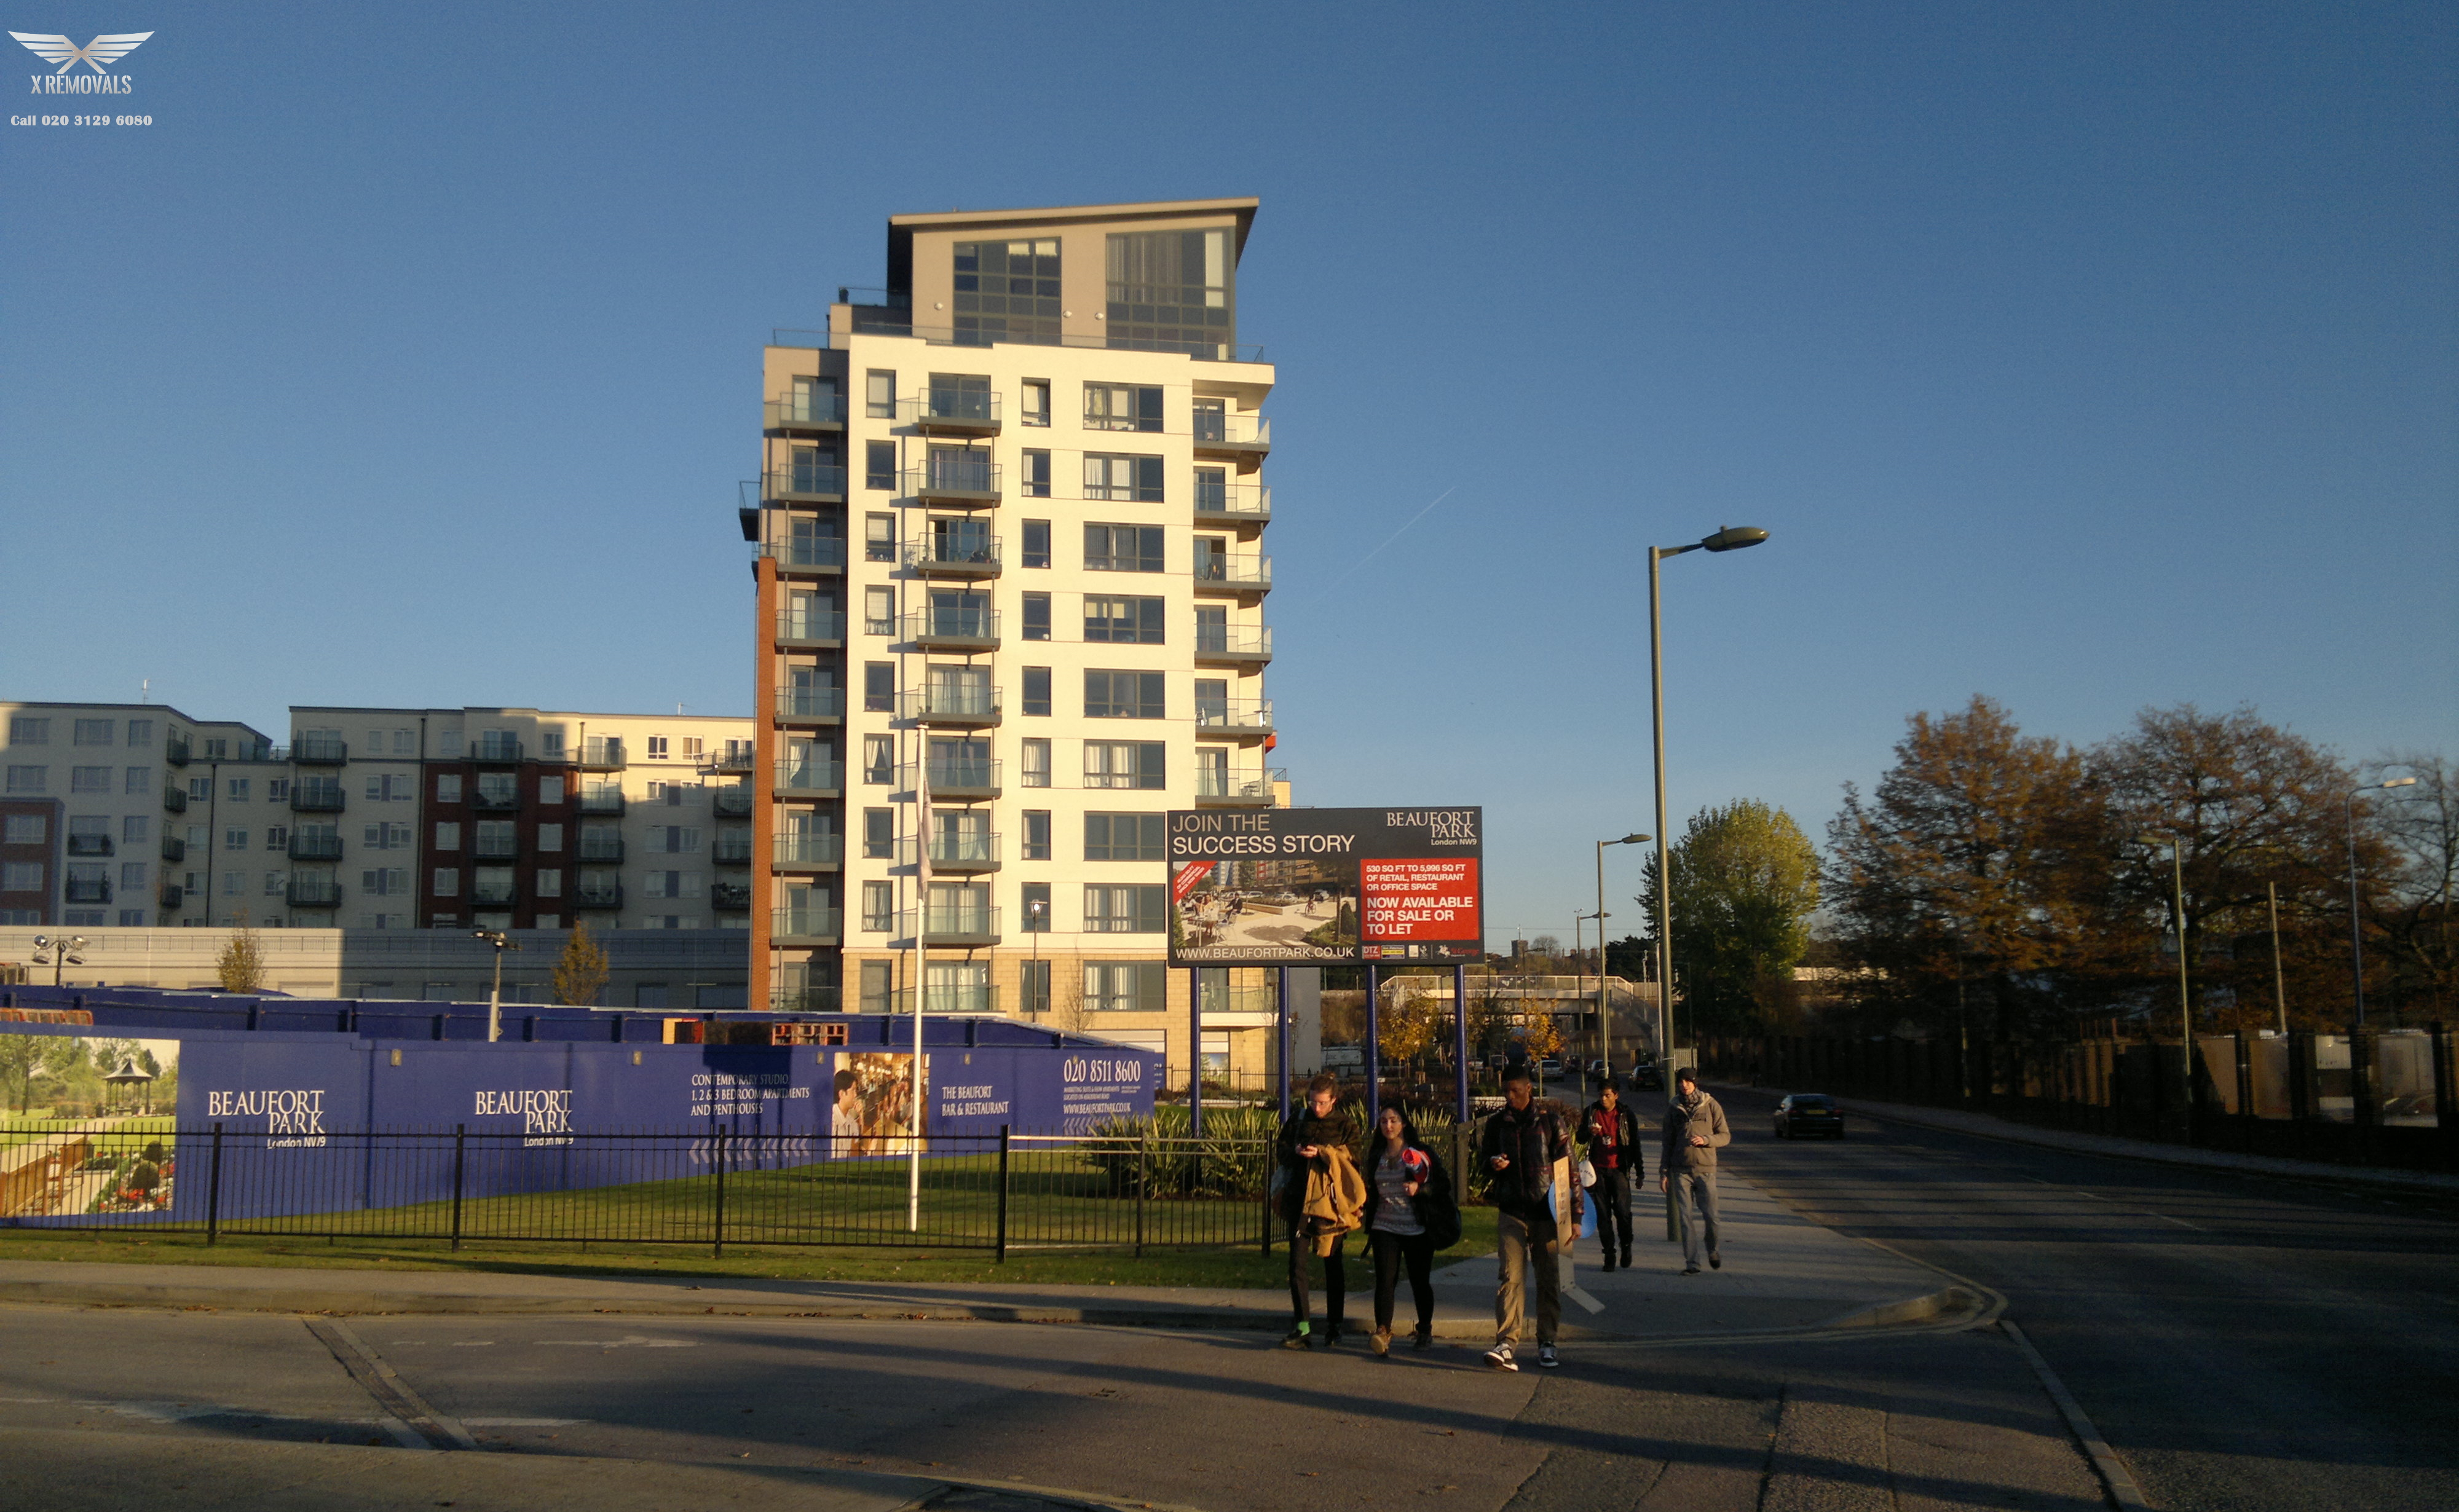 NW9 Colindale